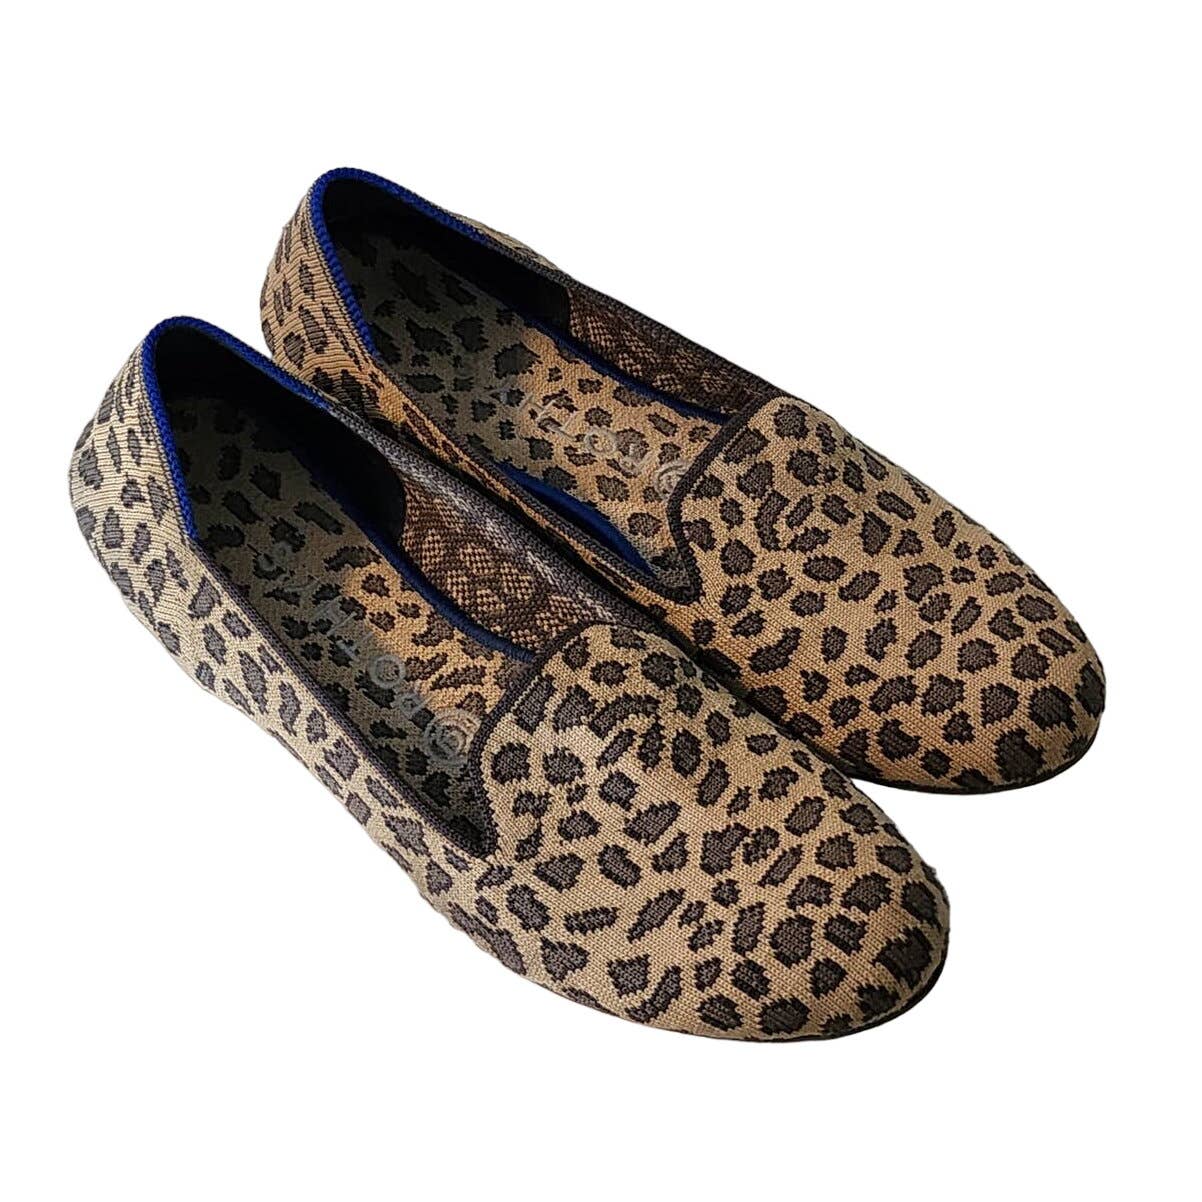 Rothy's Leopard Print Loafers size 8